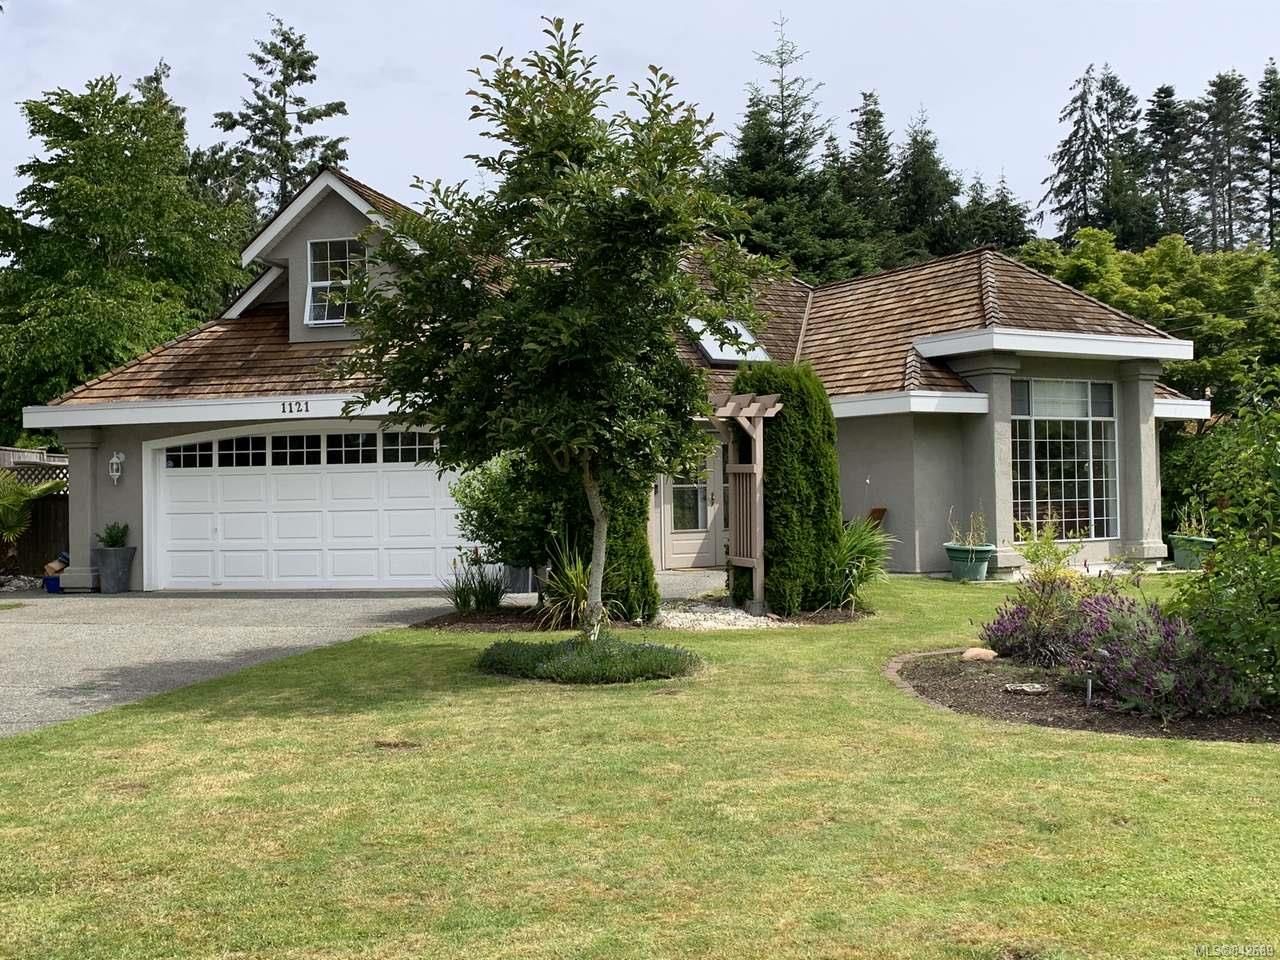 I have sold a property at 1121 Pintail Dr in QUALICUM BEACH
